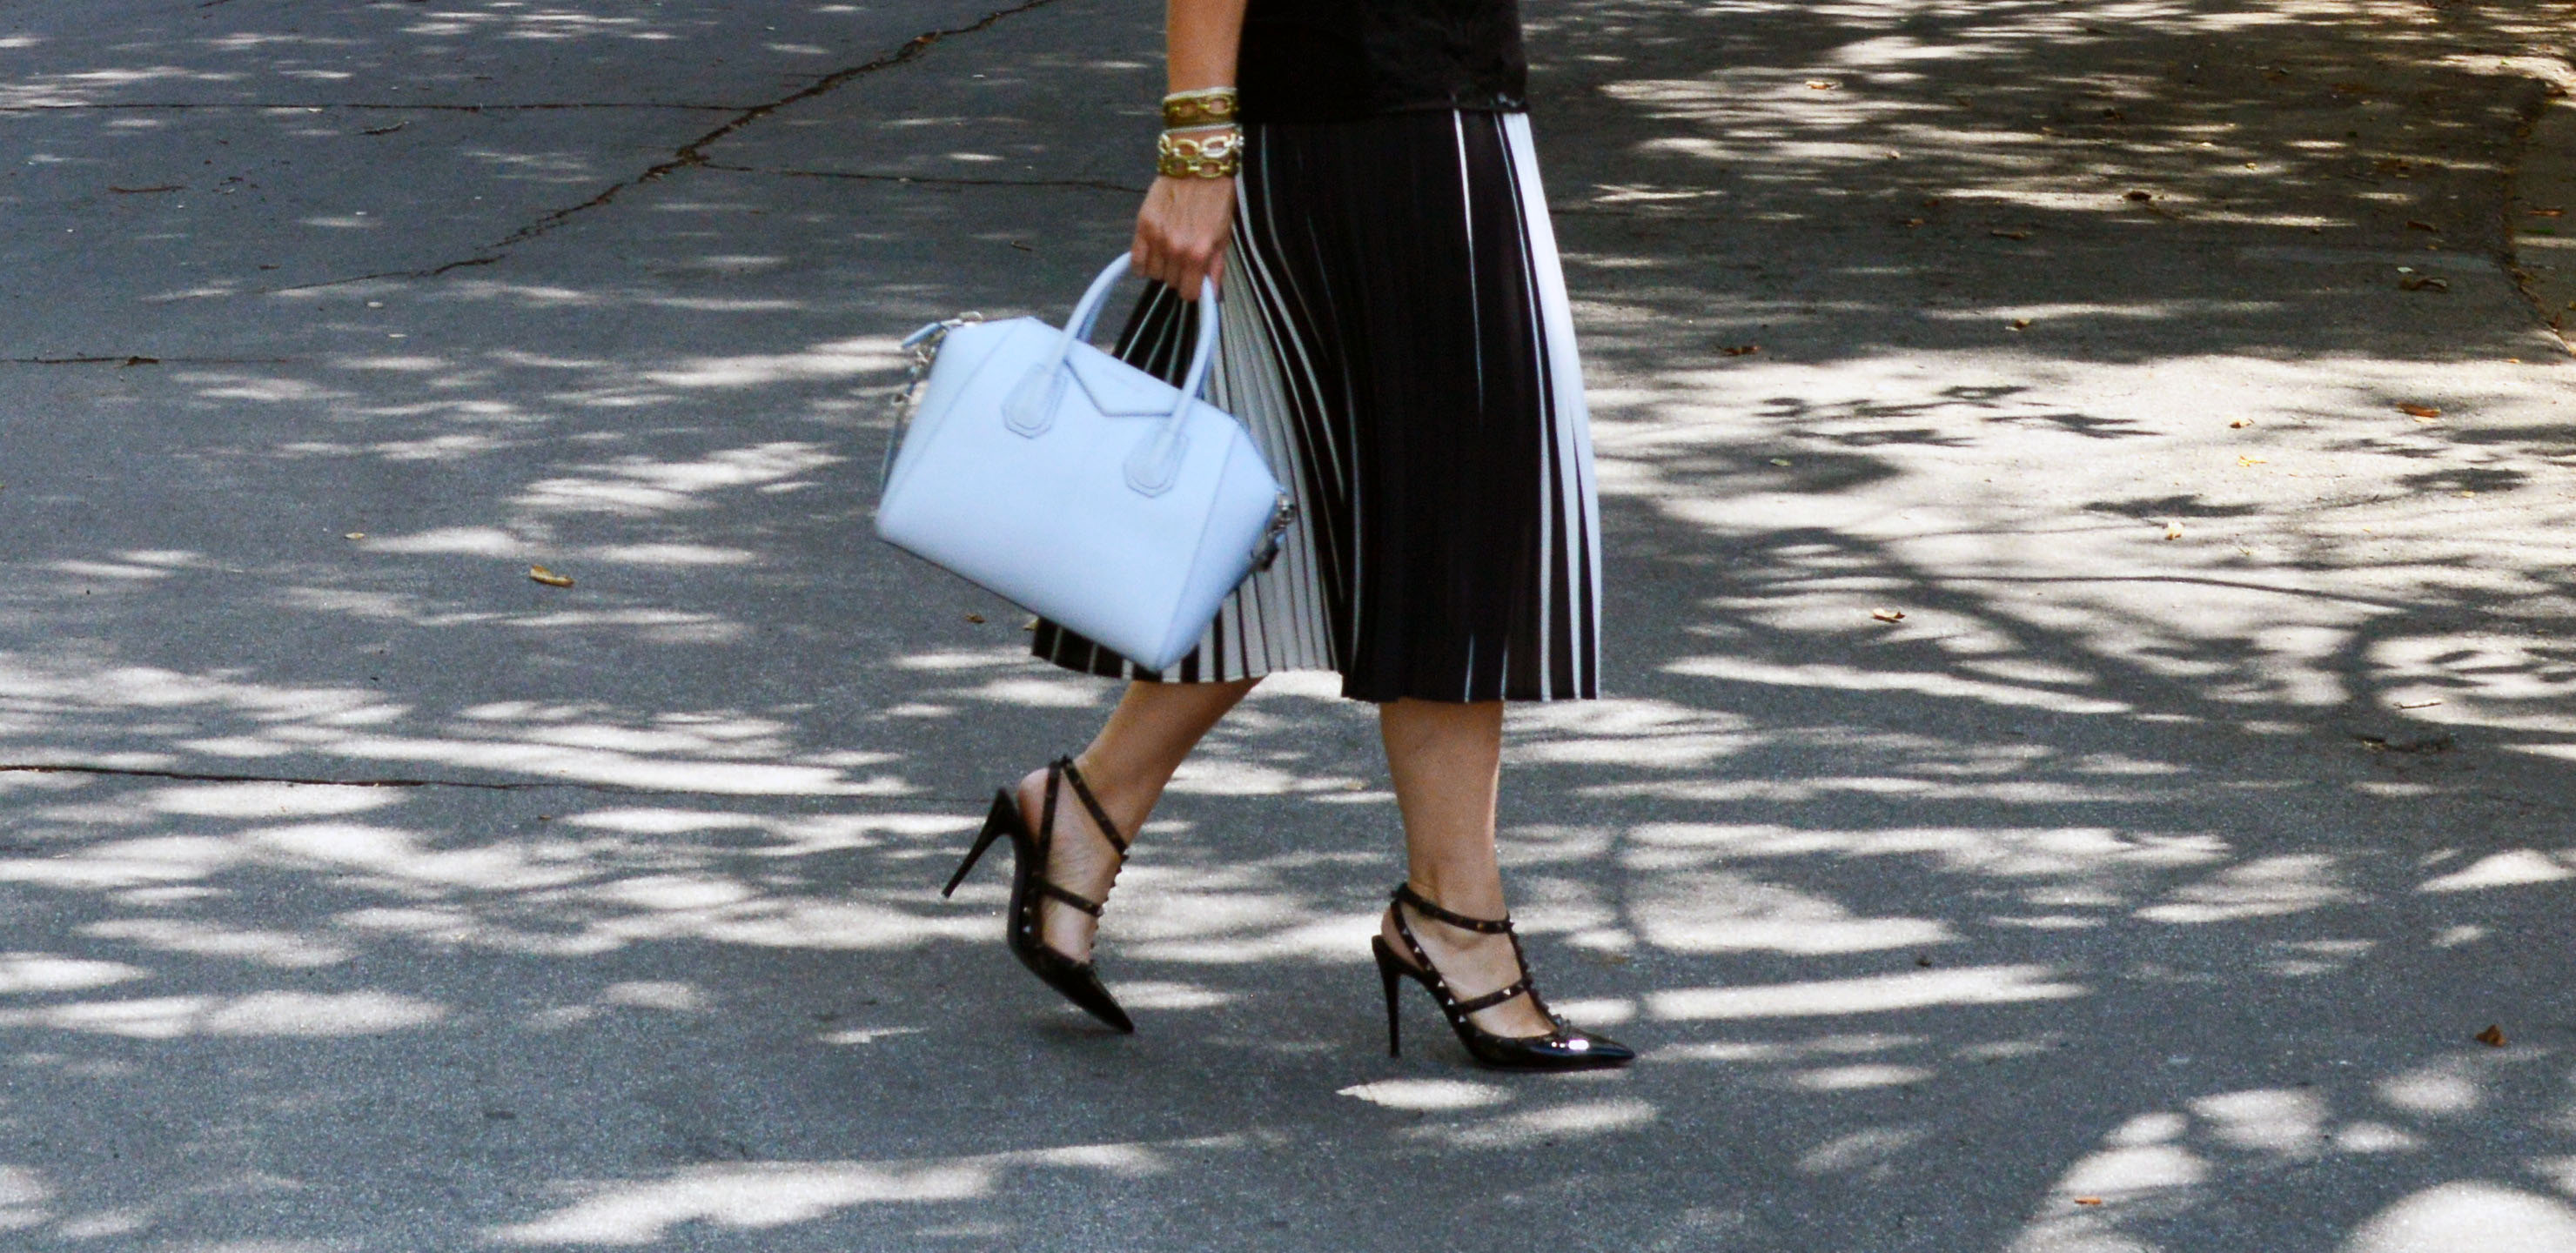 black and white pleated skirt